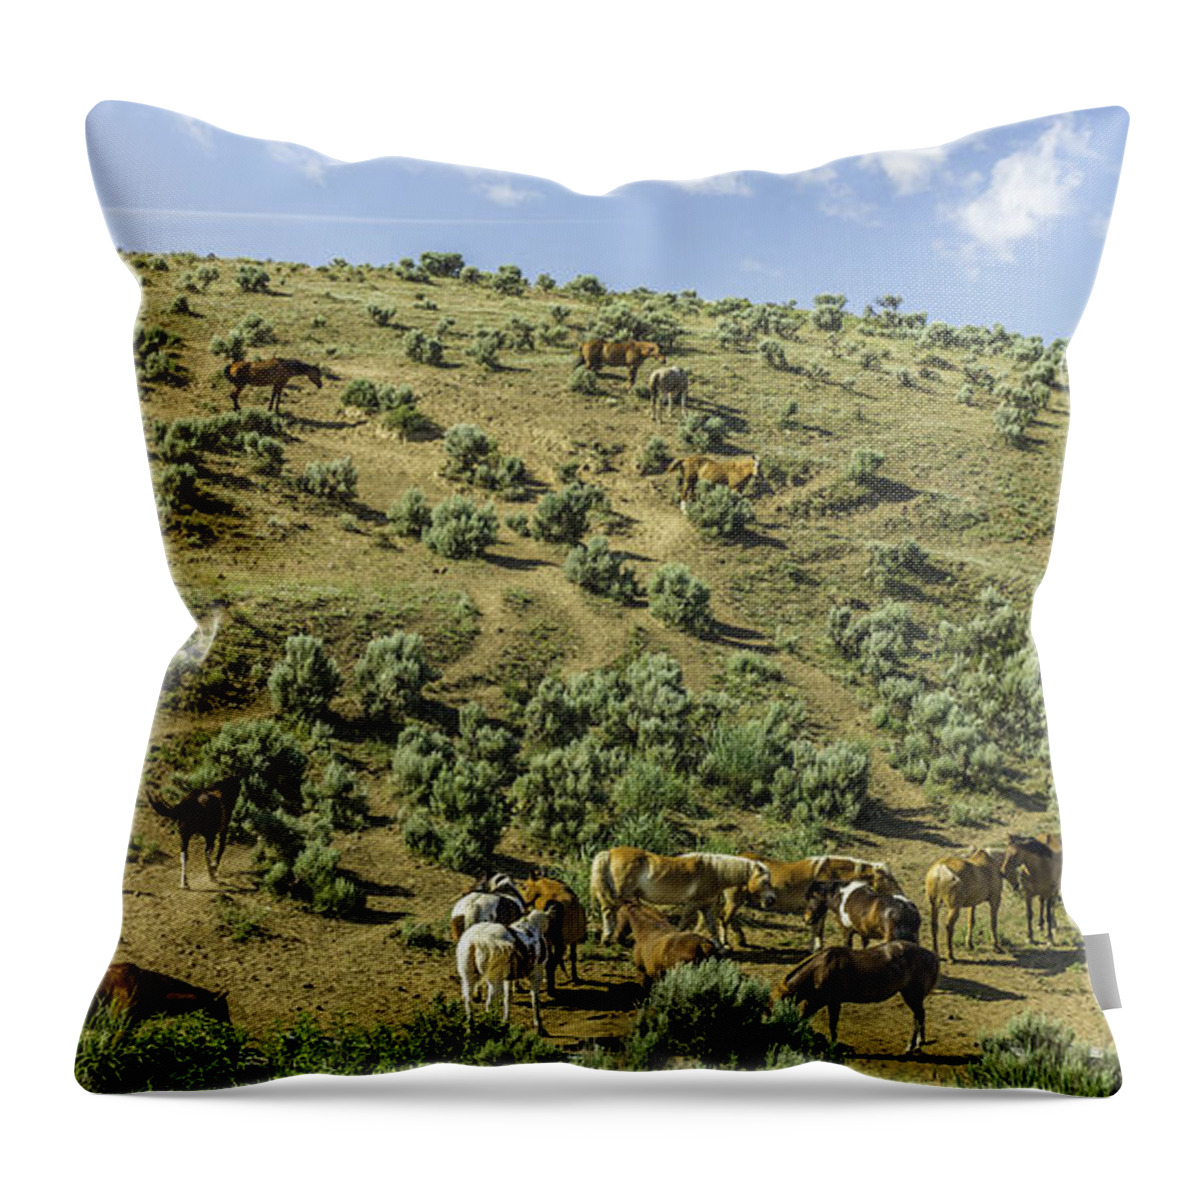 Horses Throw Pillow featuring the photograph Herd of Horses by Mark Joseph